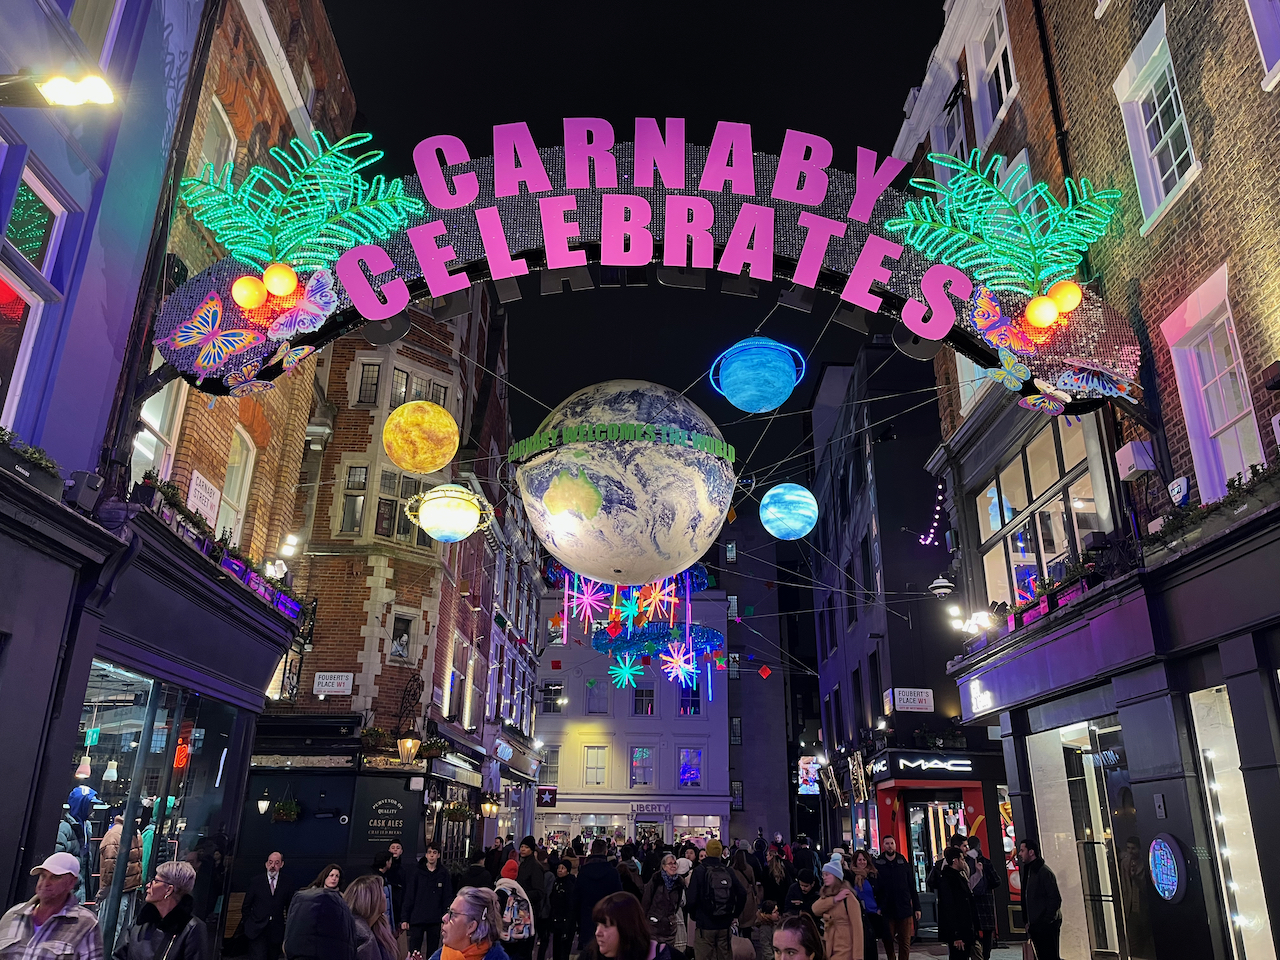 An archway with the words Carnaby Celebrates in big pink letters, with mistletoe-shaped Christmas lights and butterflies at each end. Beyond it, a large globe of planet Earth is suspended in the air with smaller planets orbiting it. Green text around the Earth reads Carnaby welcomes the world.